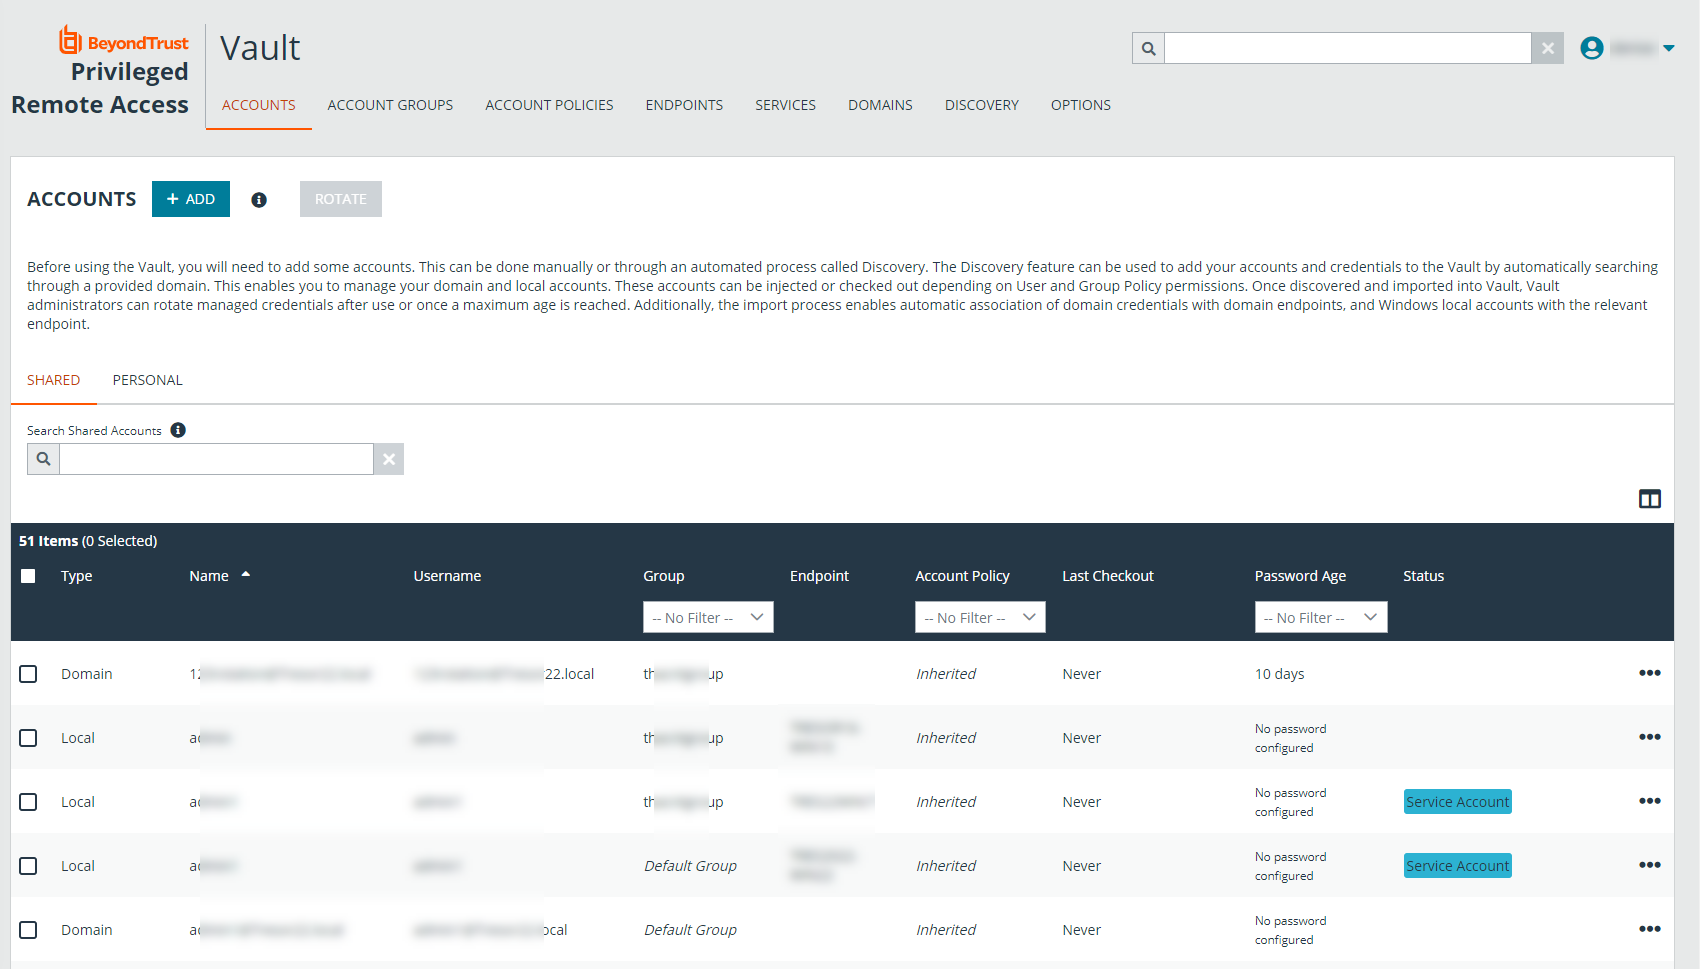 Screenshot of Vault Accounts page with Service Accounts listed